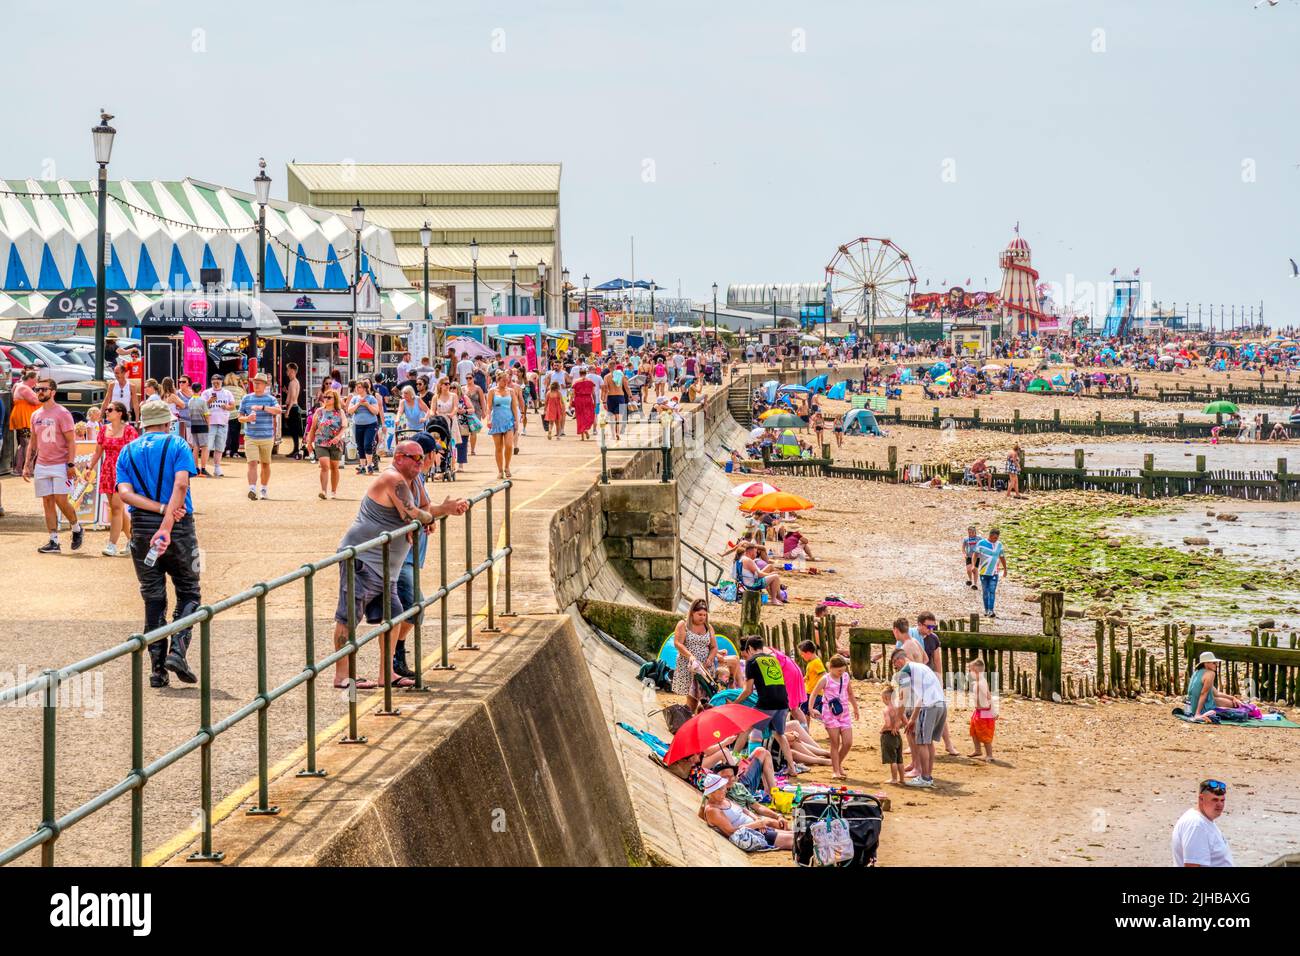 Sunday 17 July 2022.  Holidaymakers at Hunstanton in Norfolk enjoying the sunshine on what is predicted to be one of the hottest weekends of the year, with an extreme weather warning issued for England. Stock Photo